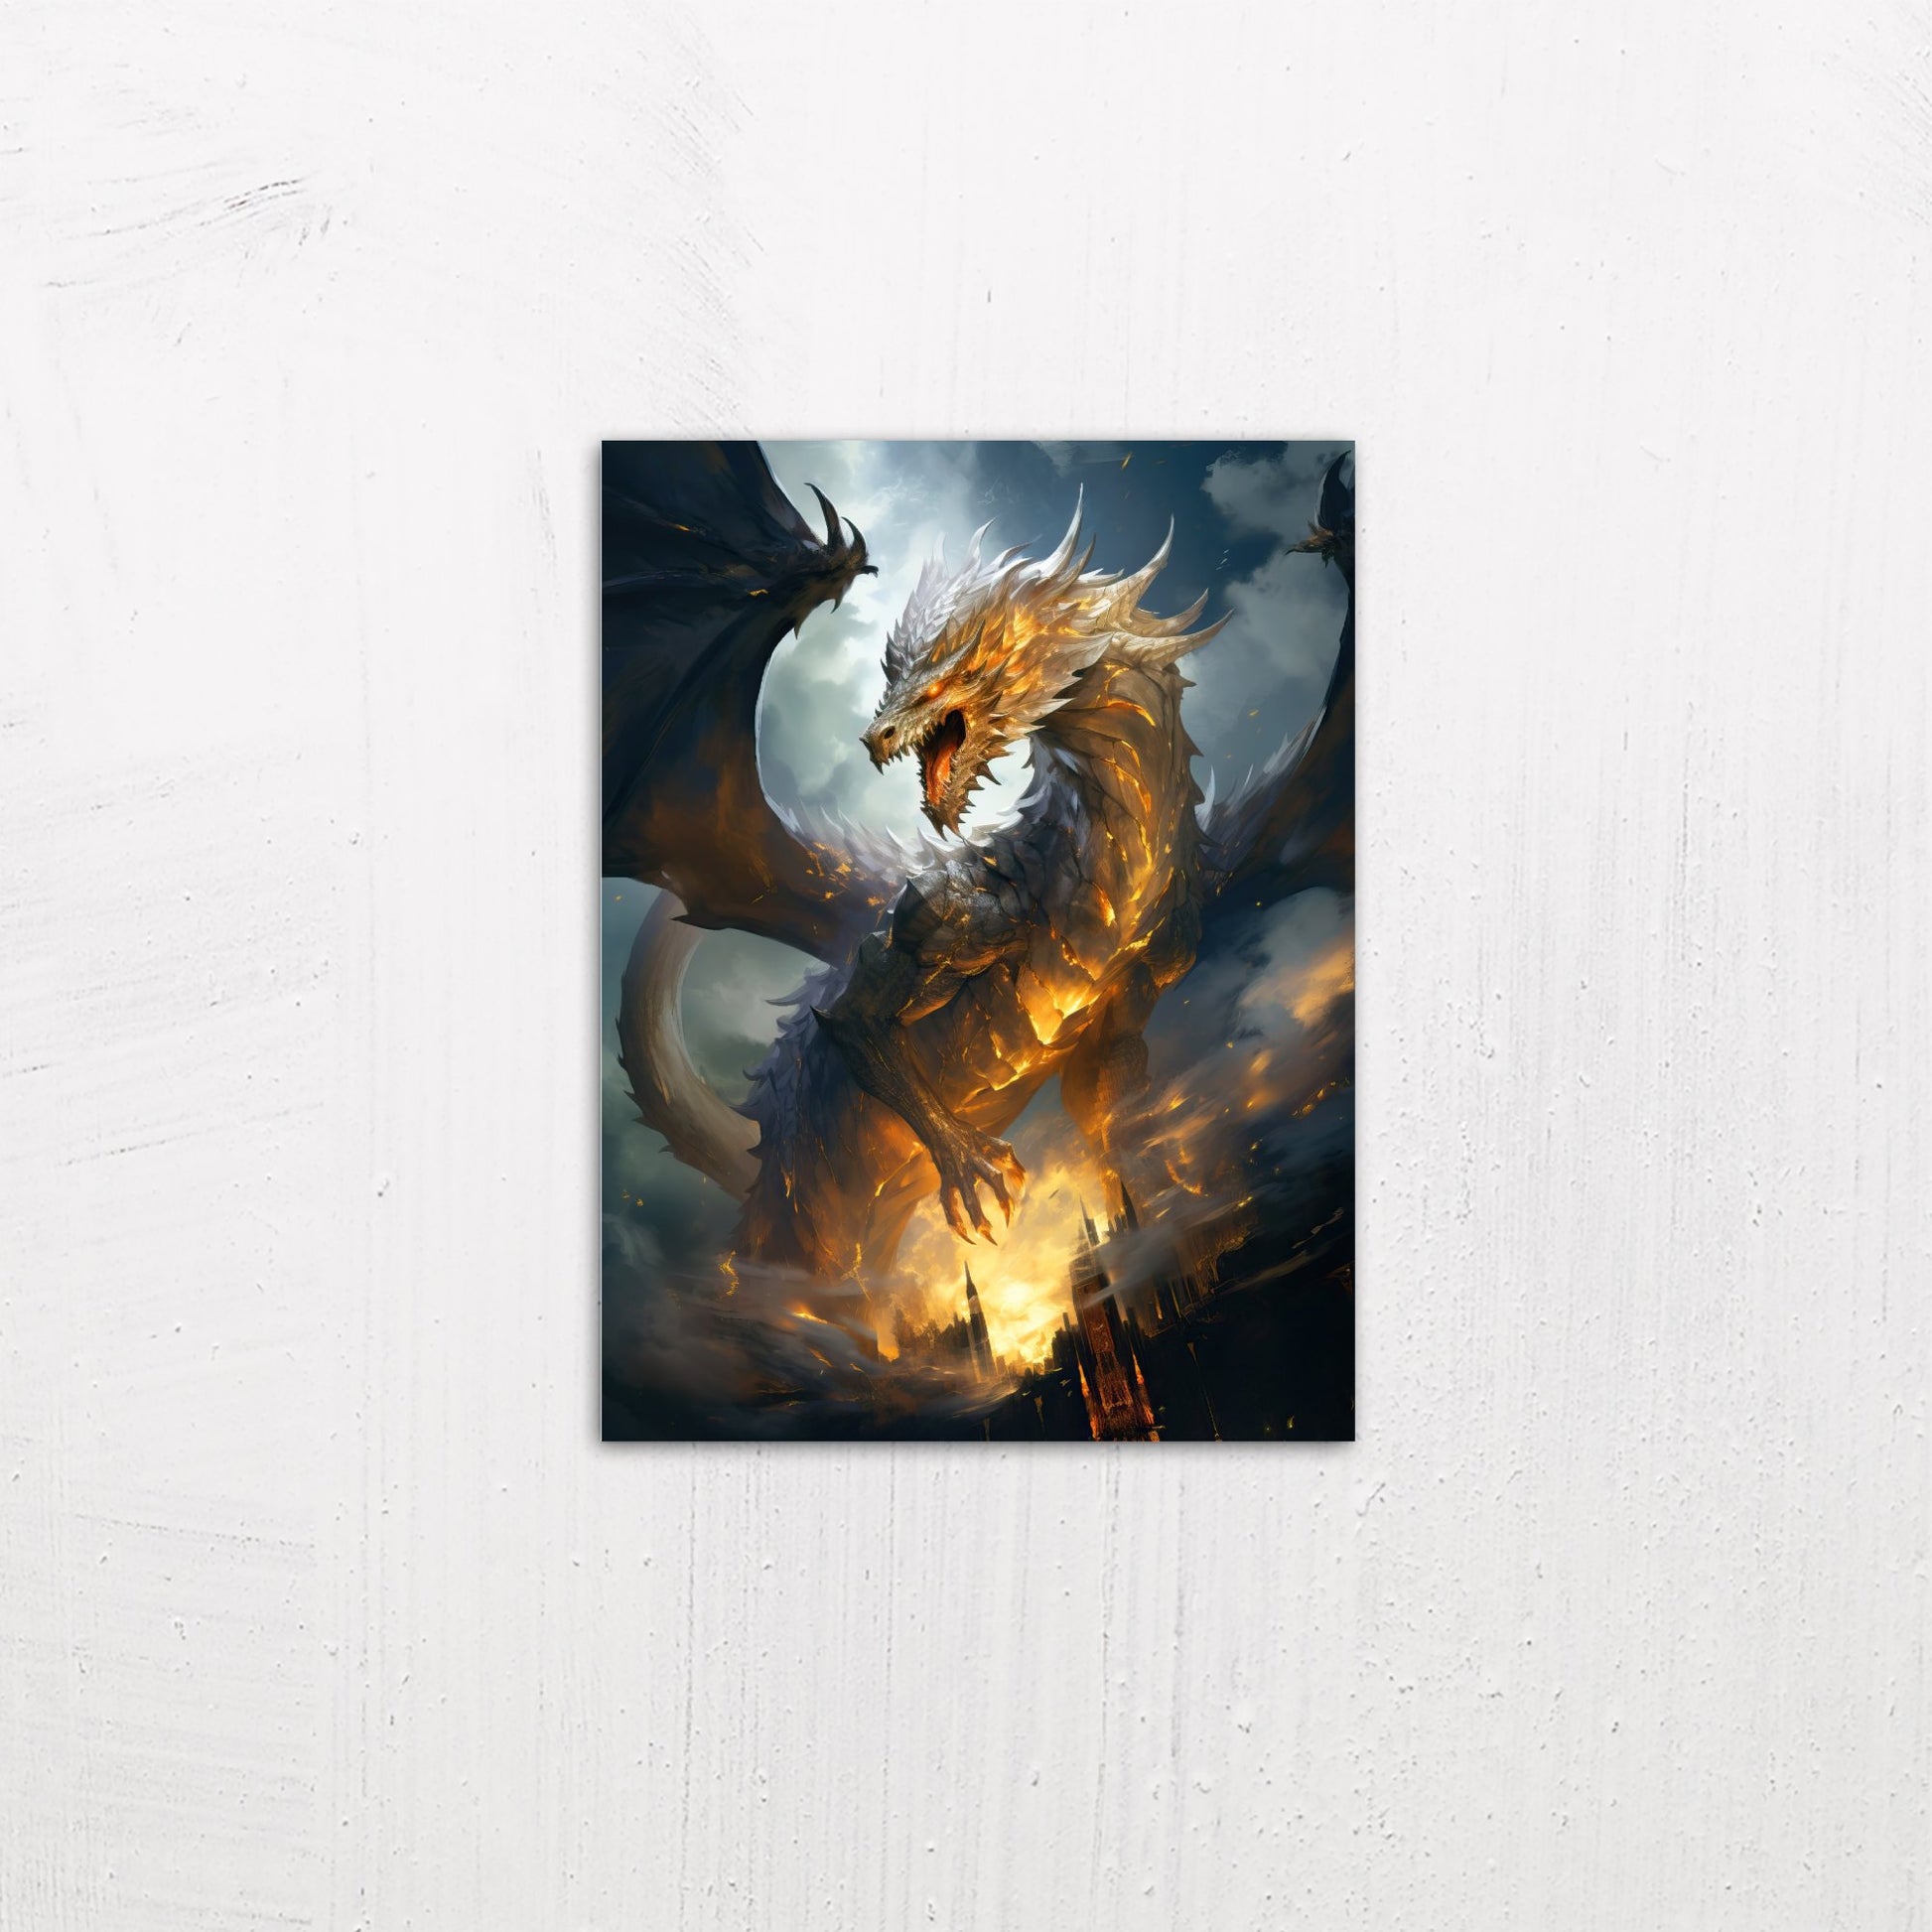 A small size metal art poster display plate with printed design of a Golden Dragon Fantasy Painting